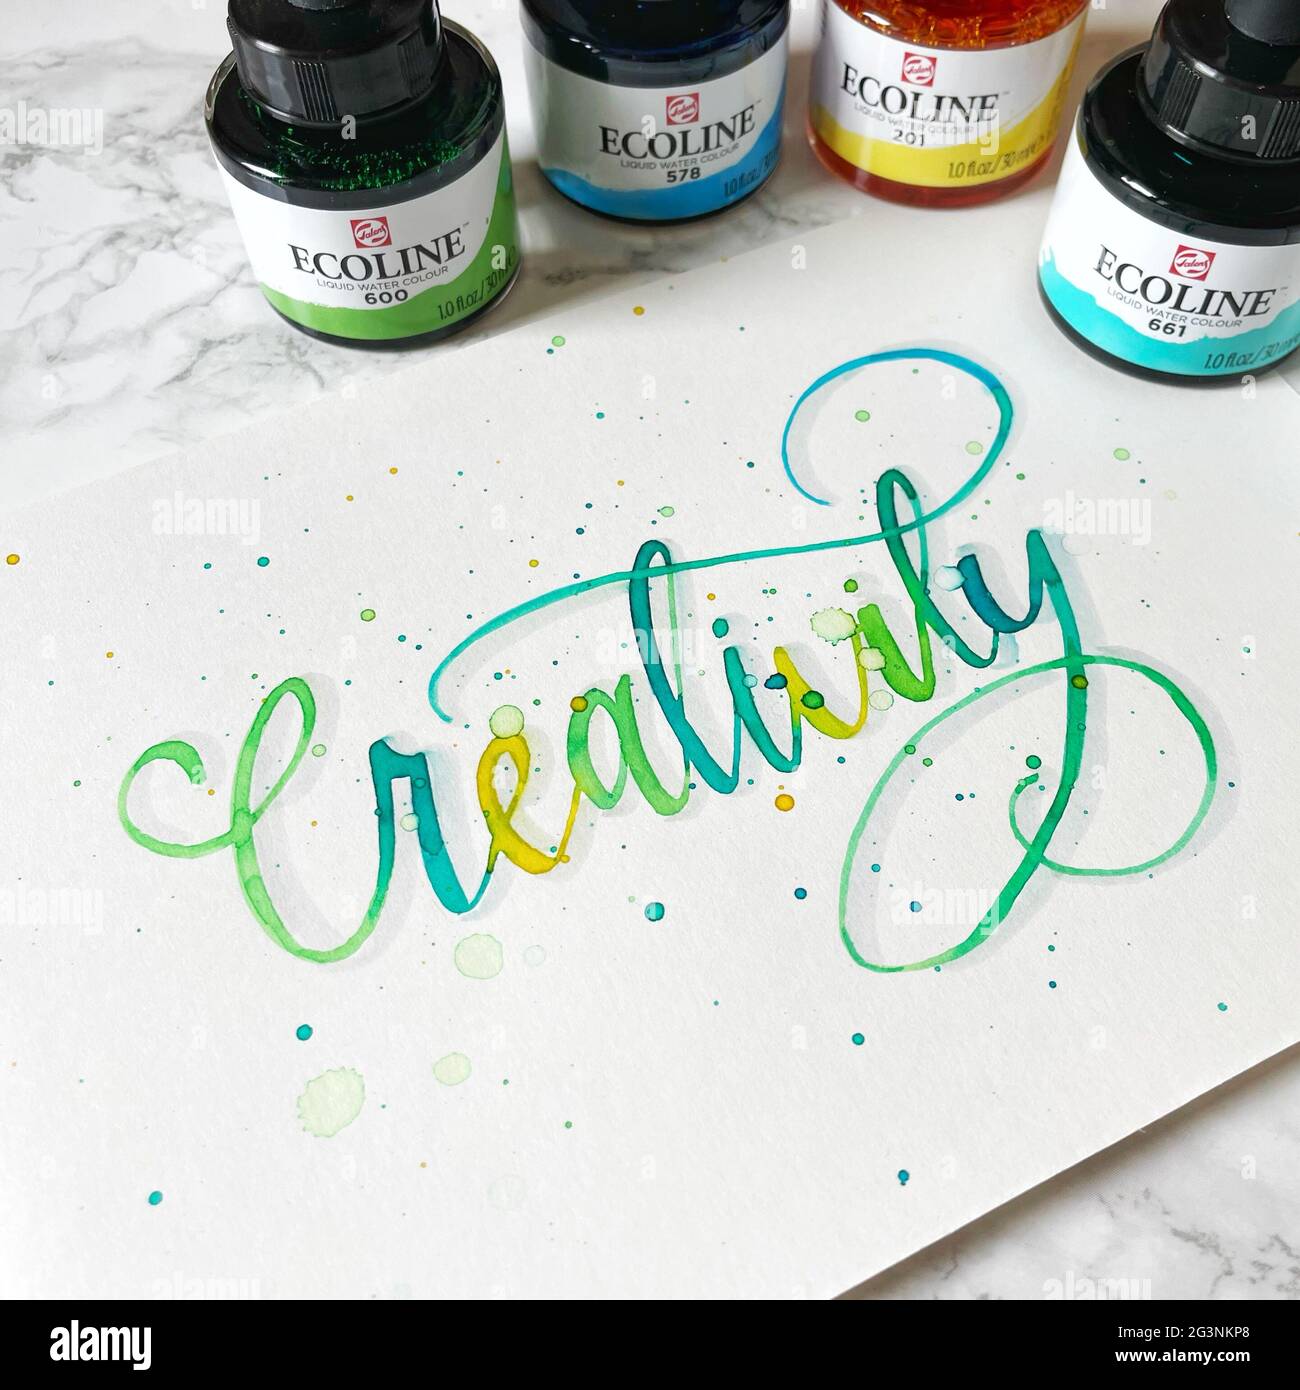 Creativity inscription made with Ecoline Liquid Watercolors in flourishing calligraphy style Stock Photo